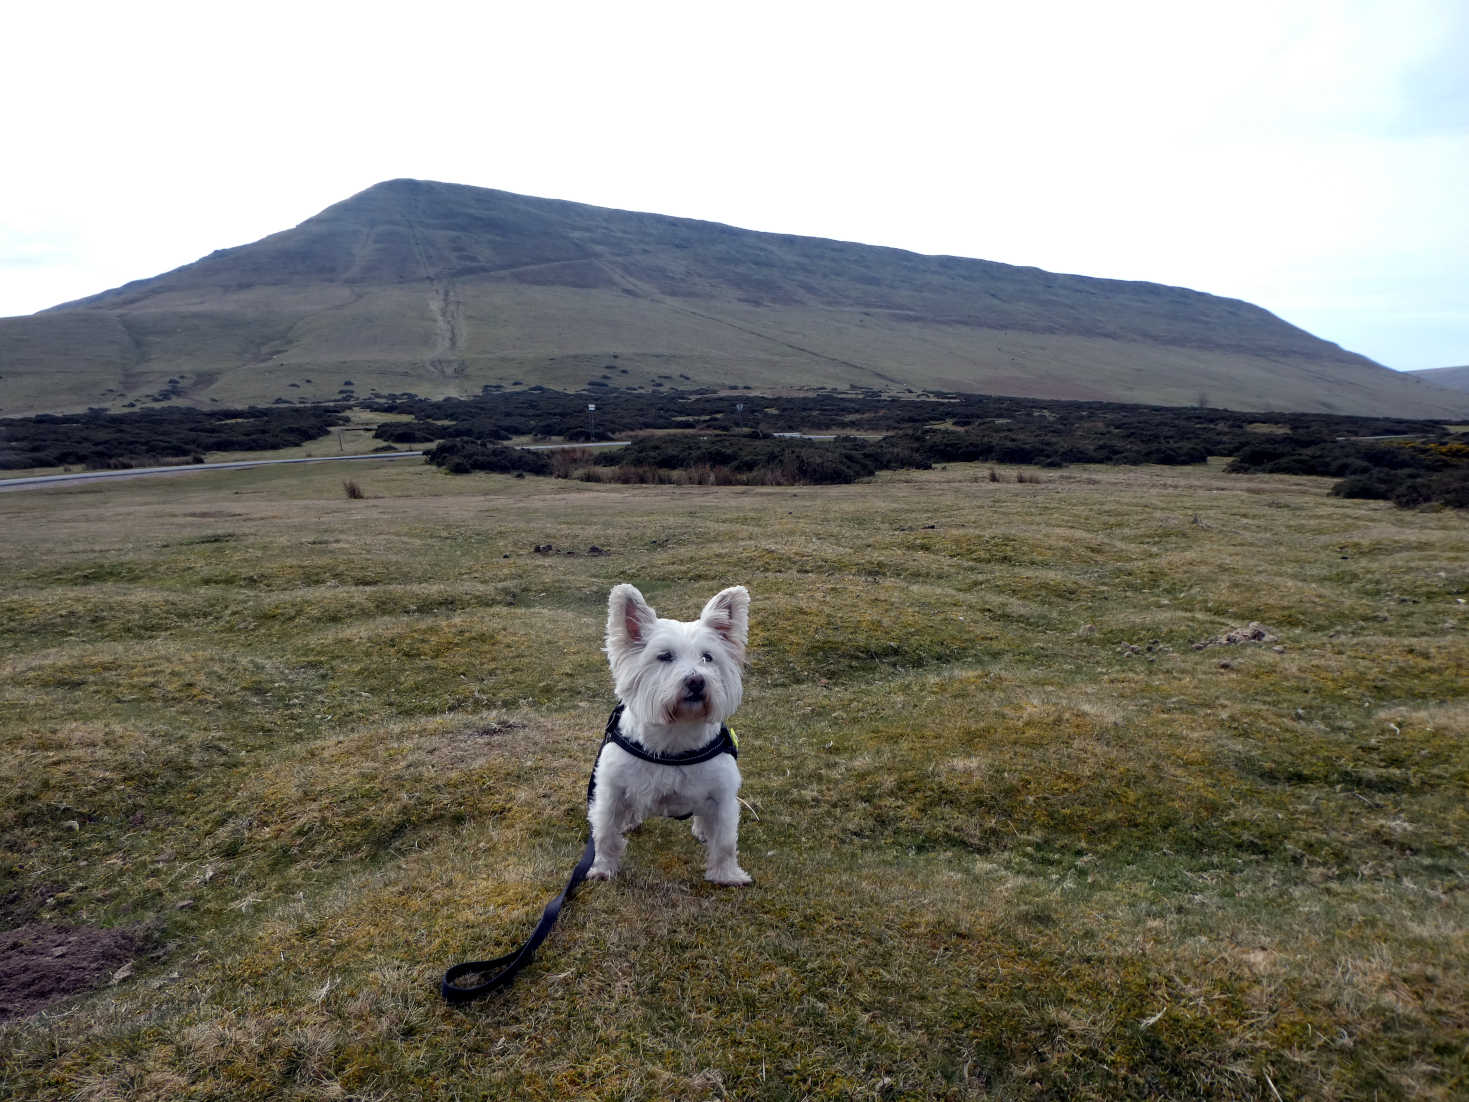 Poppy the westie on the high road